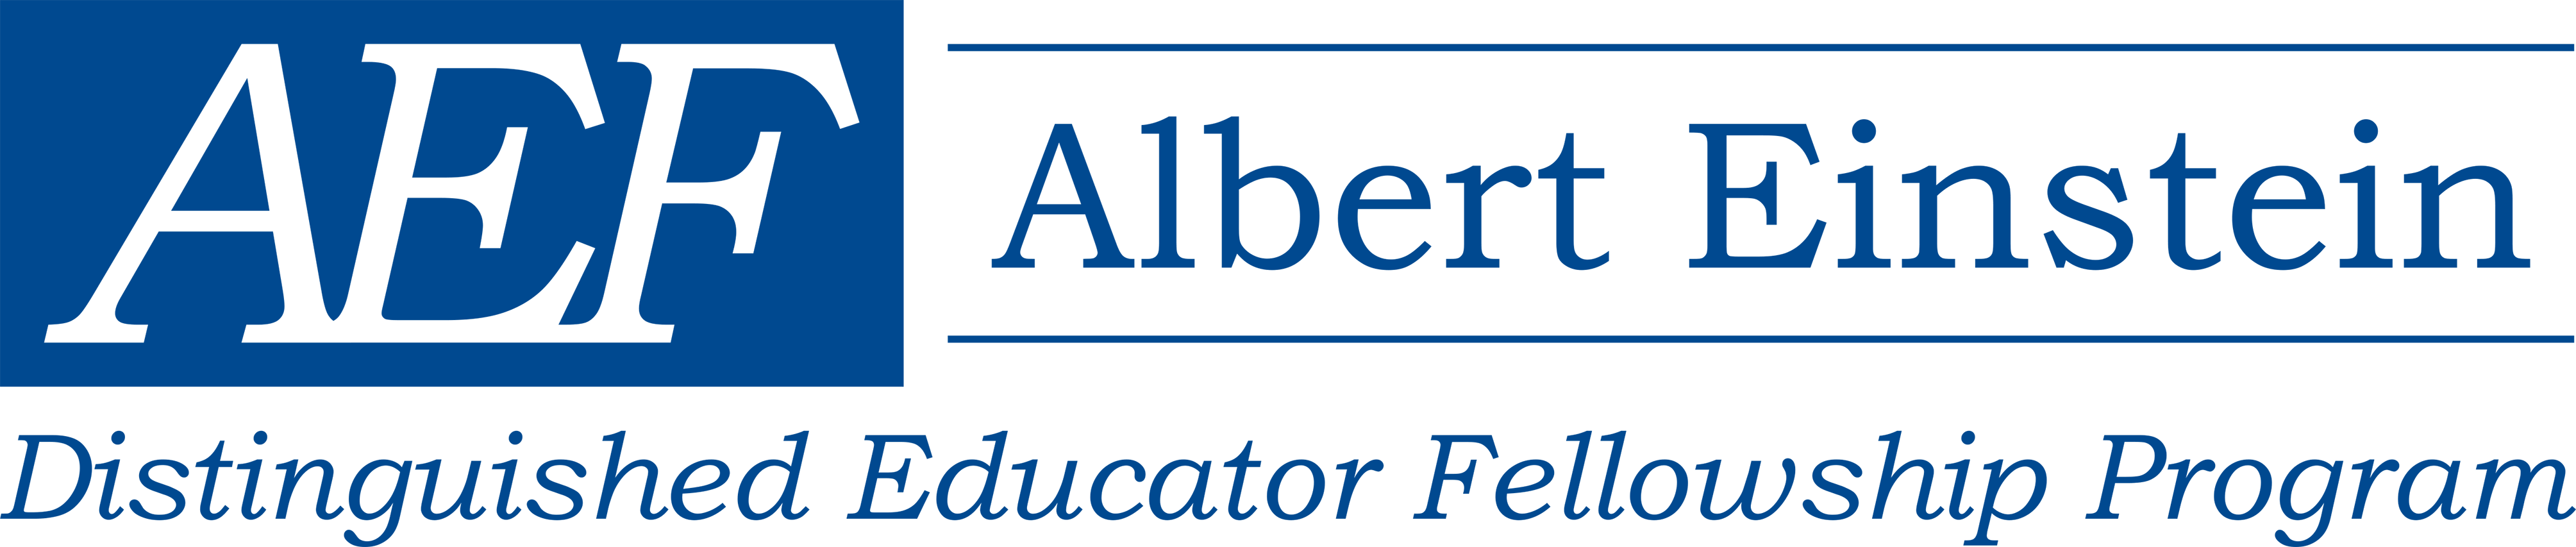 A group of the nation’s most accomplished STEM teachers selected as Albert Einstein Educator Fellows